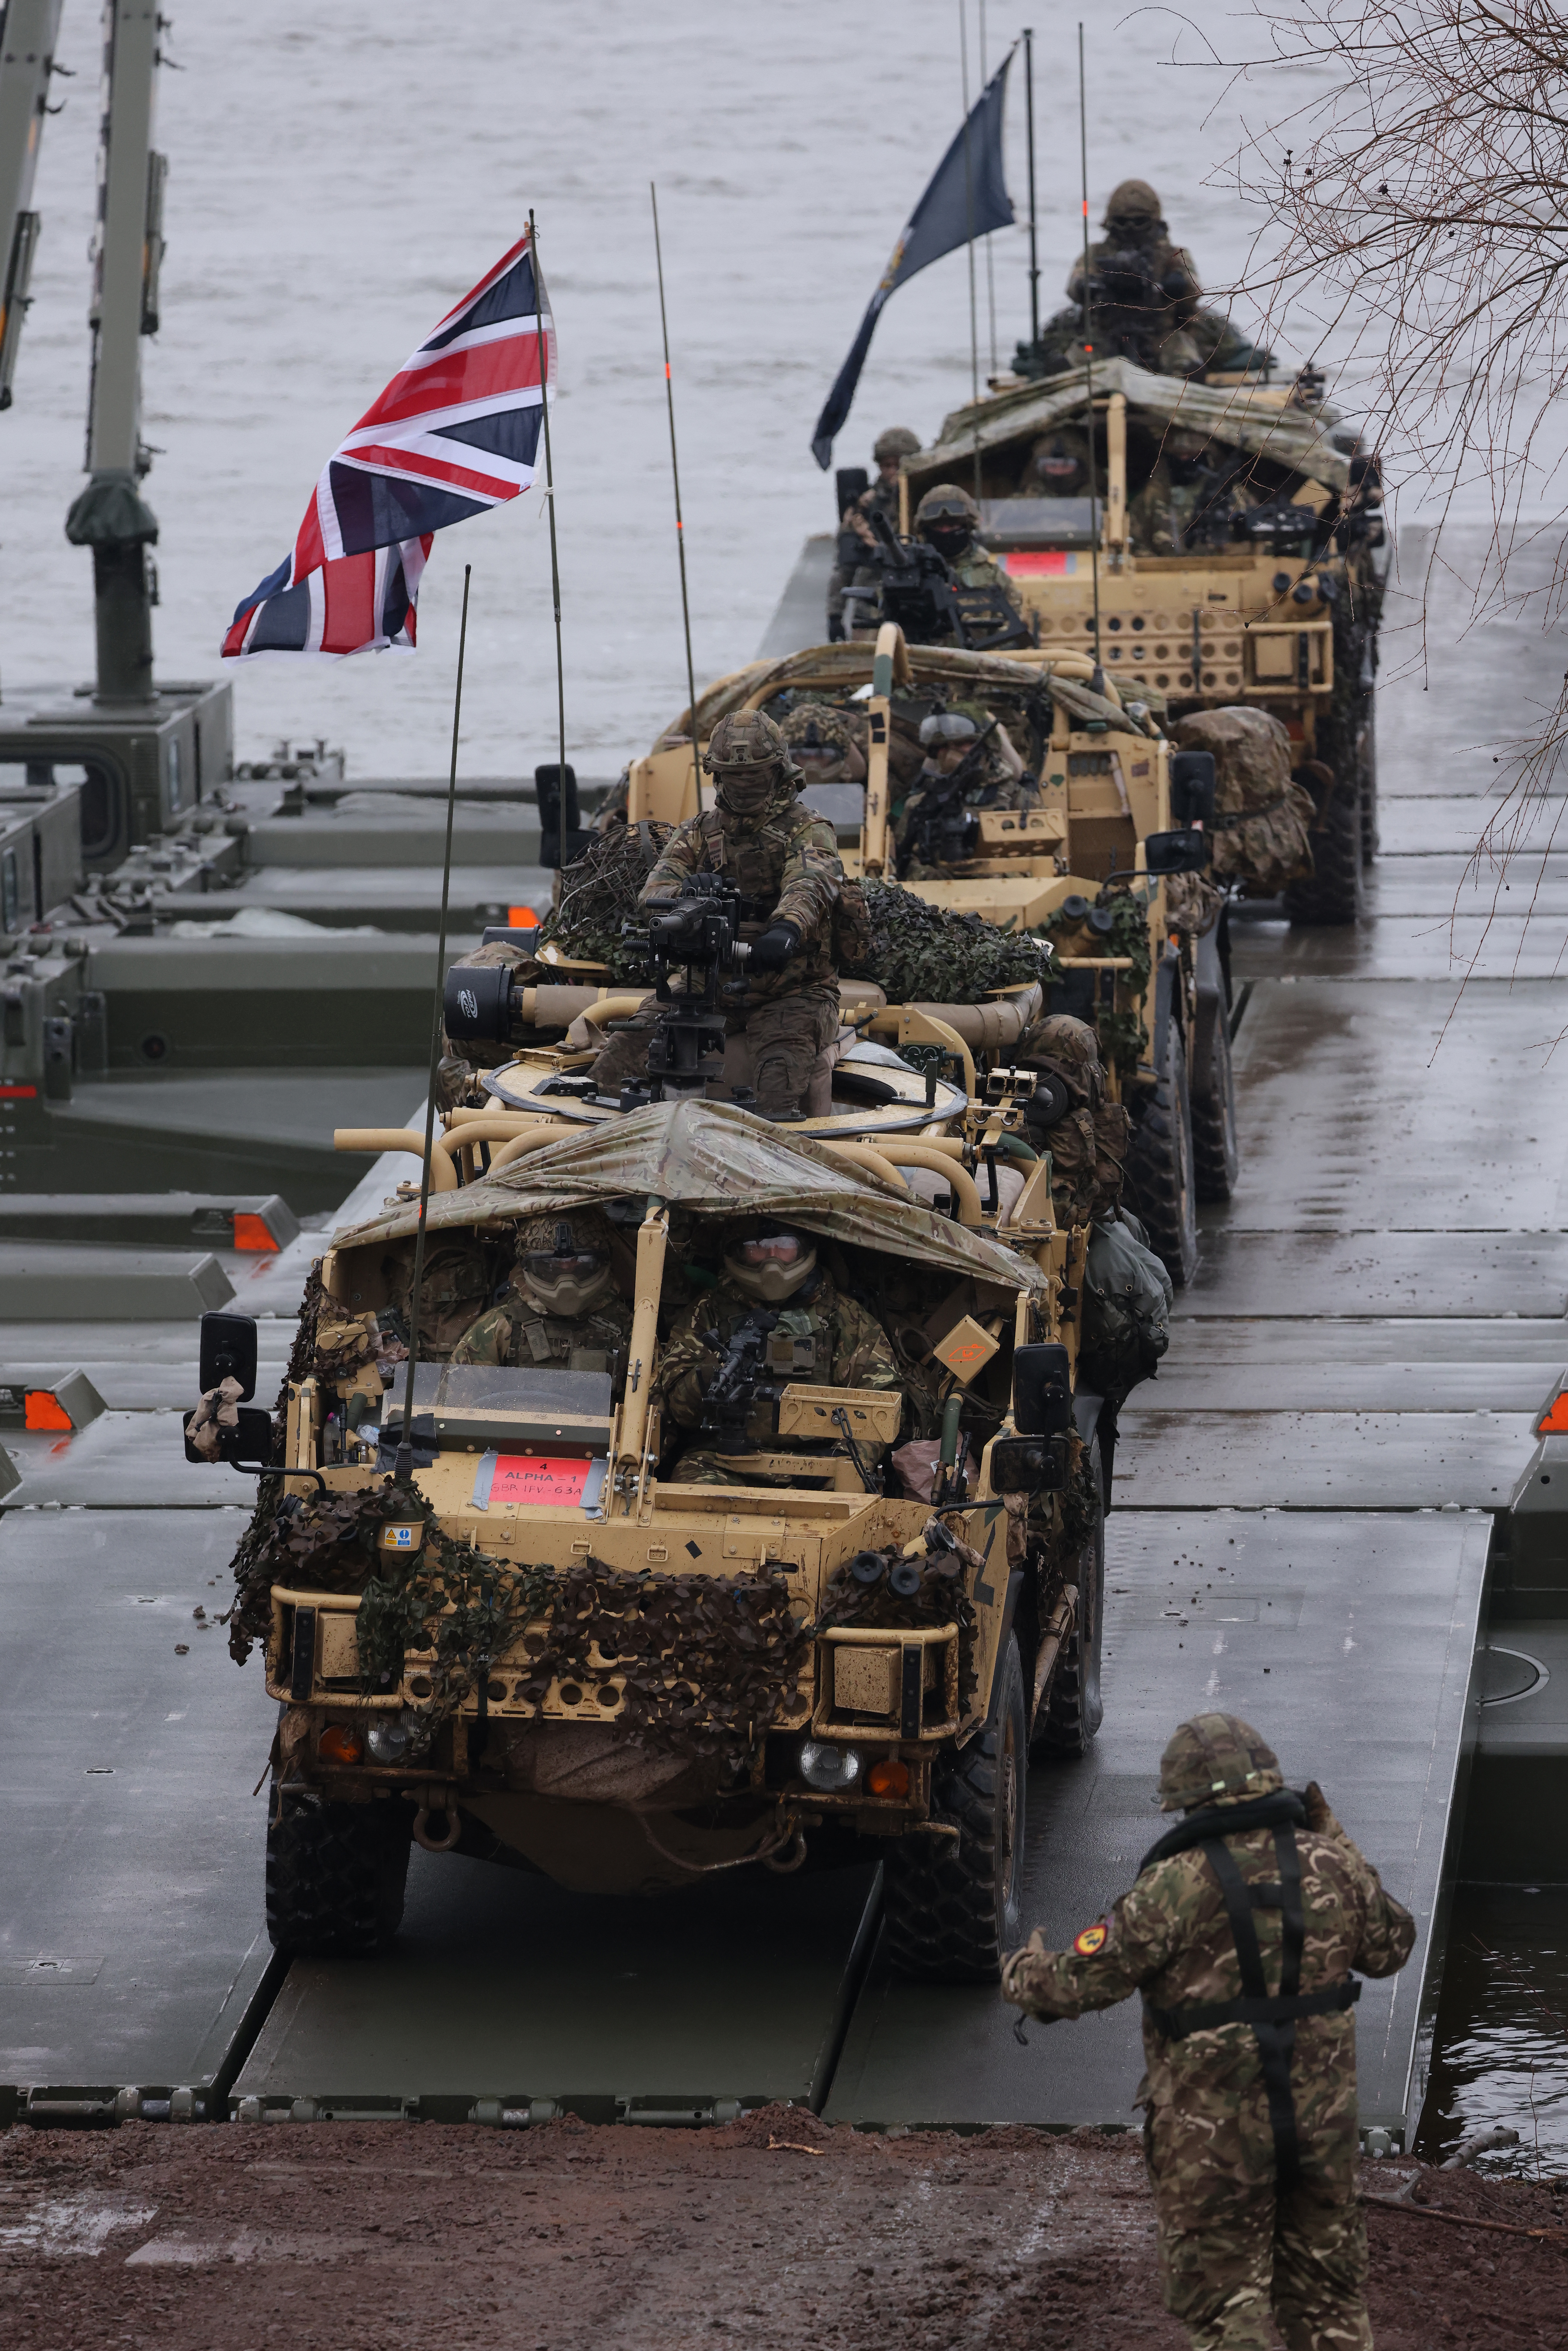 British troops drive Jackal combat vehicles during a Nato military exercise in Poland